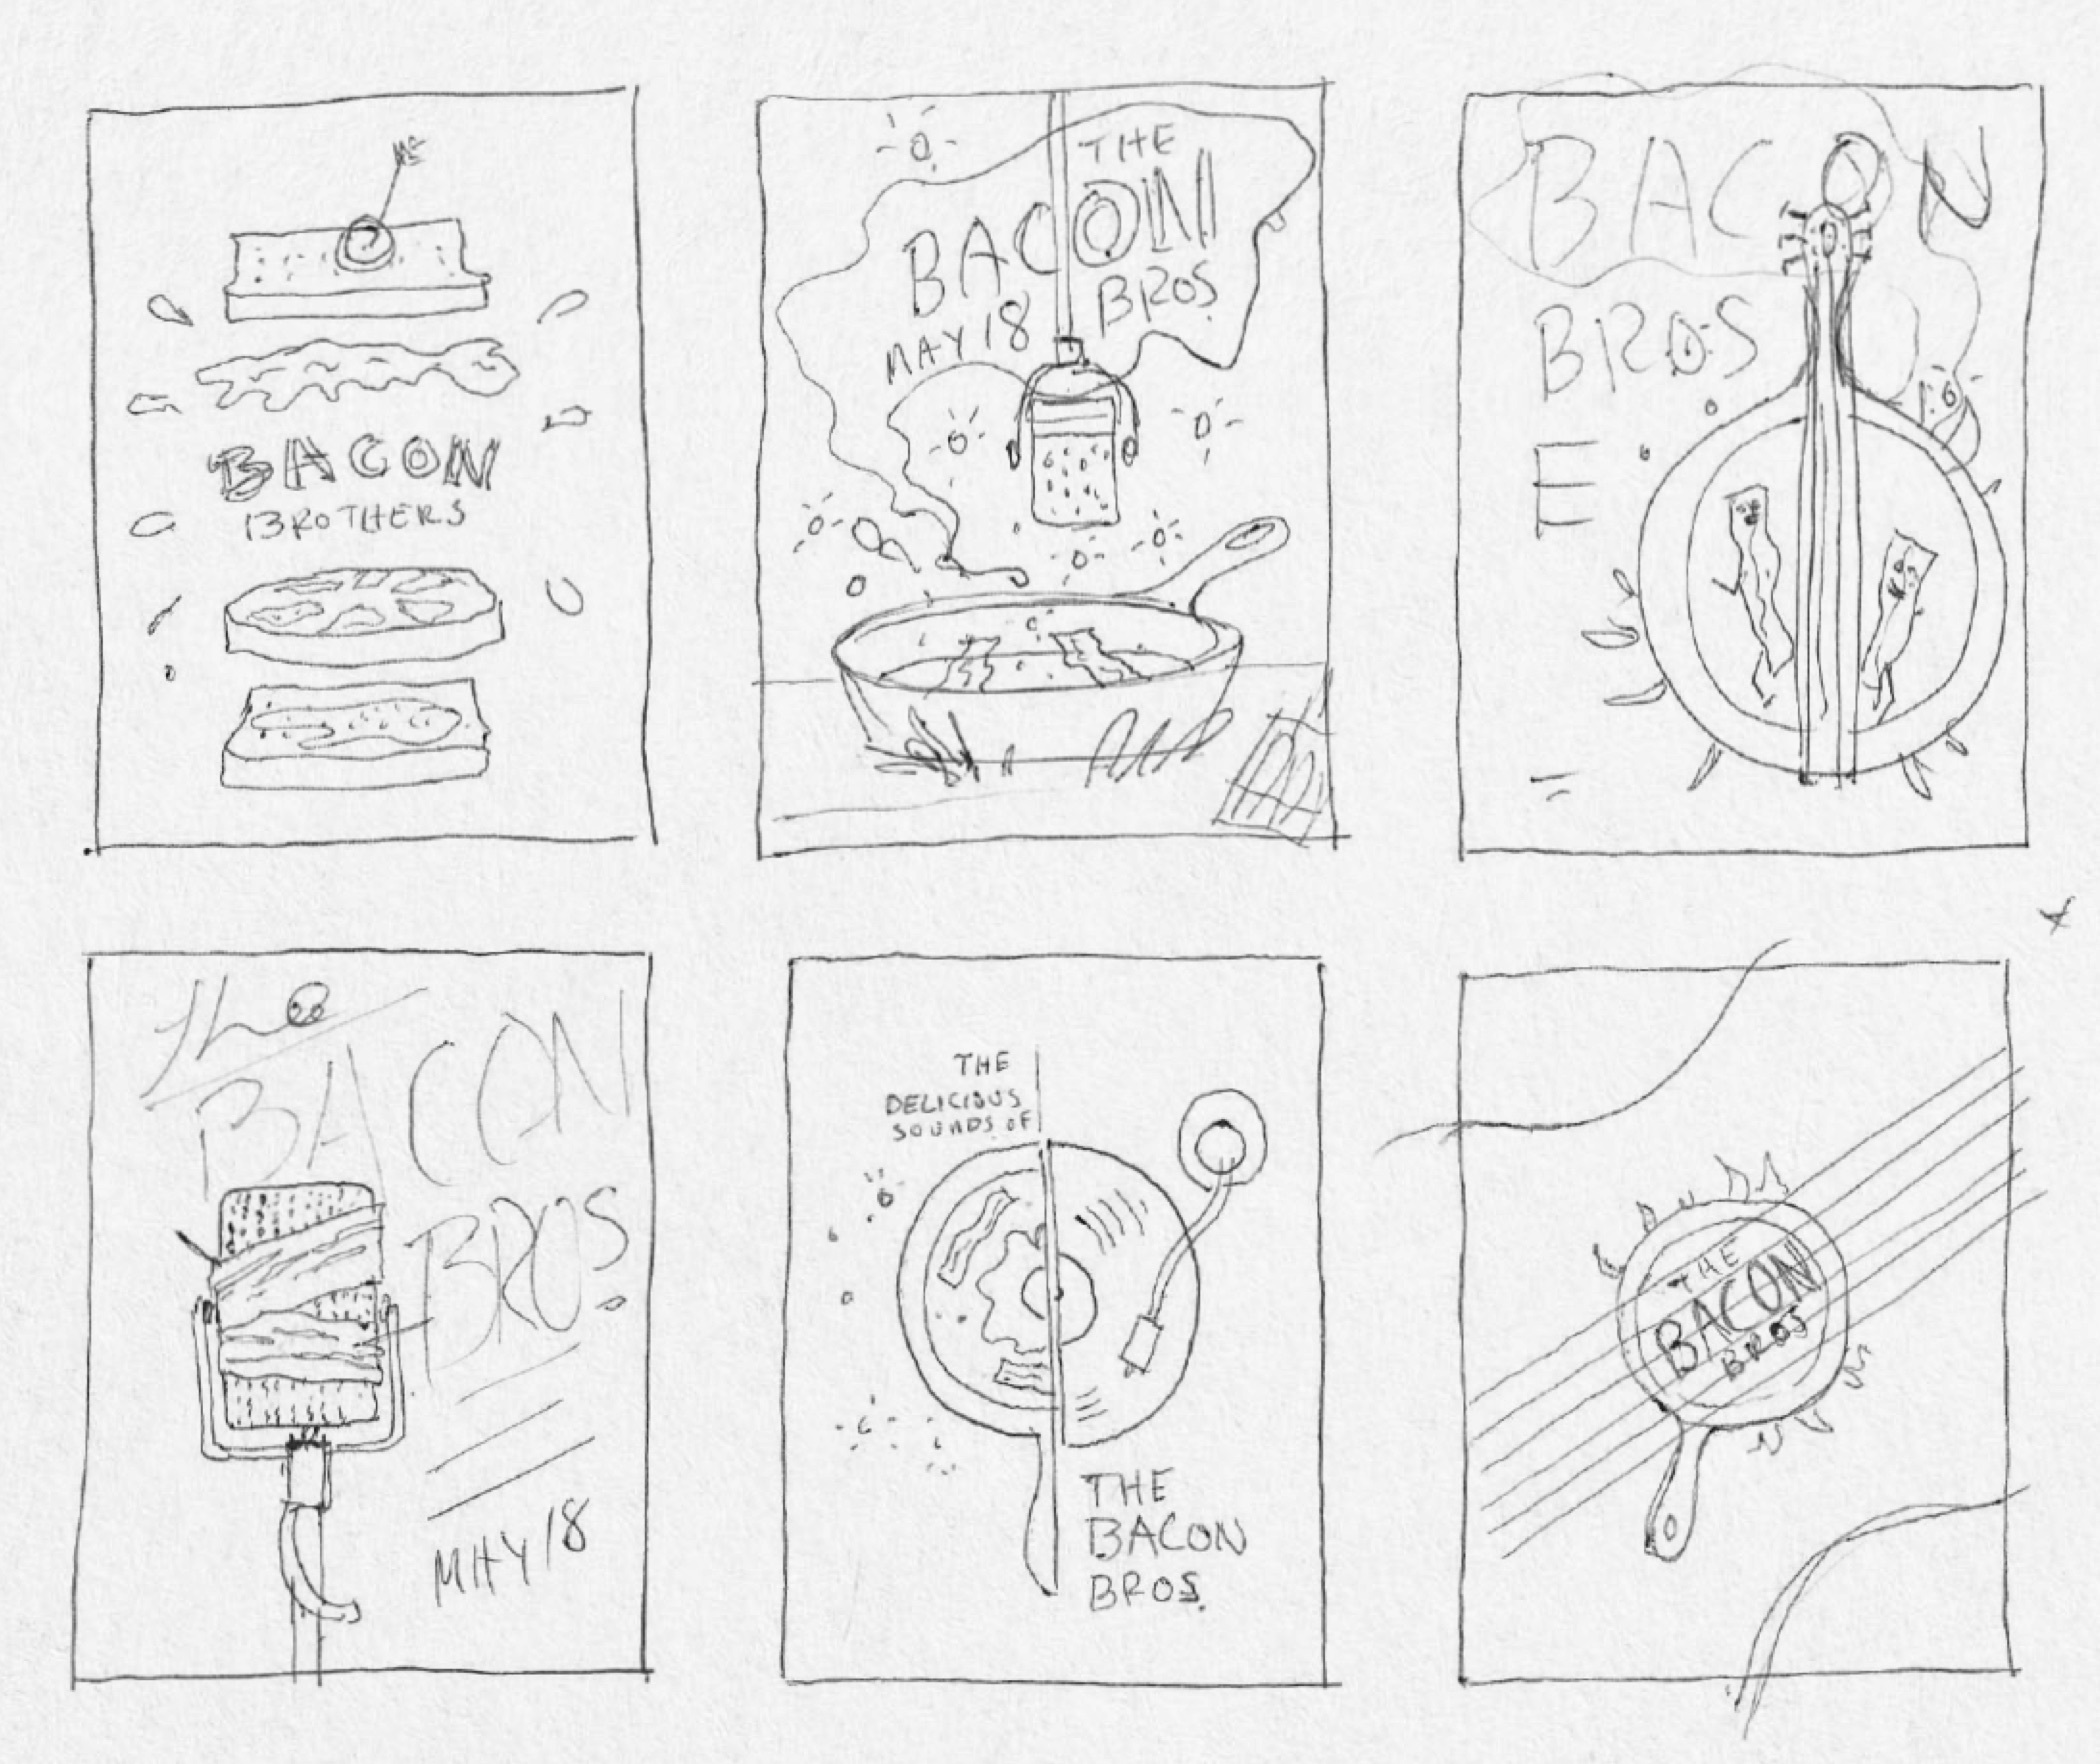 An array of sketches for a poster promoting the band The Bacon Bros. The sketches depict various connections between music and food.